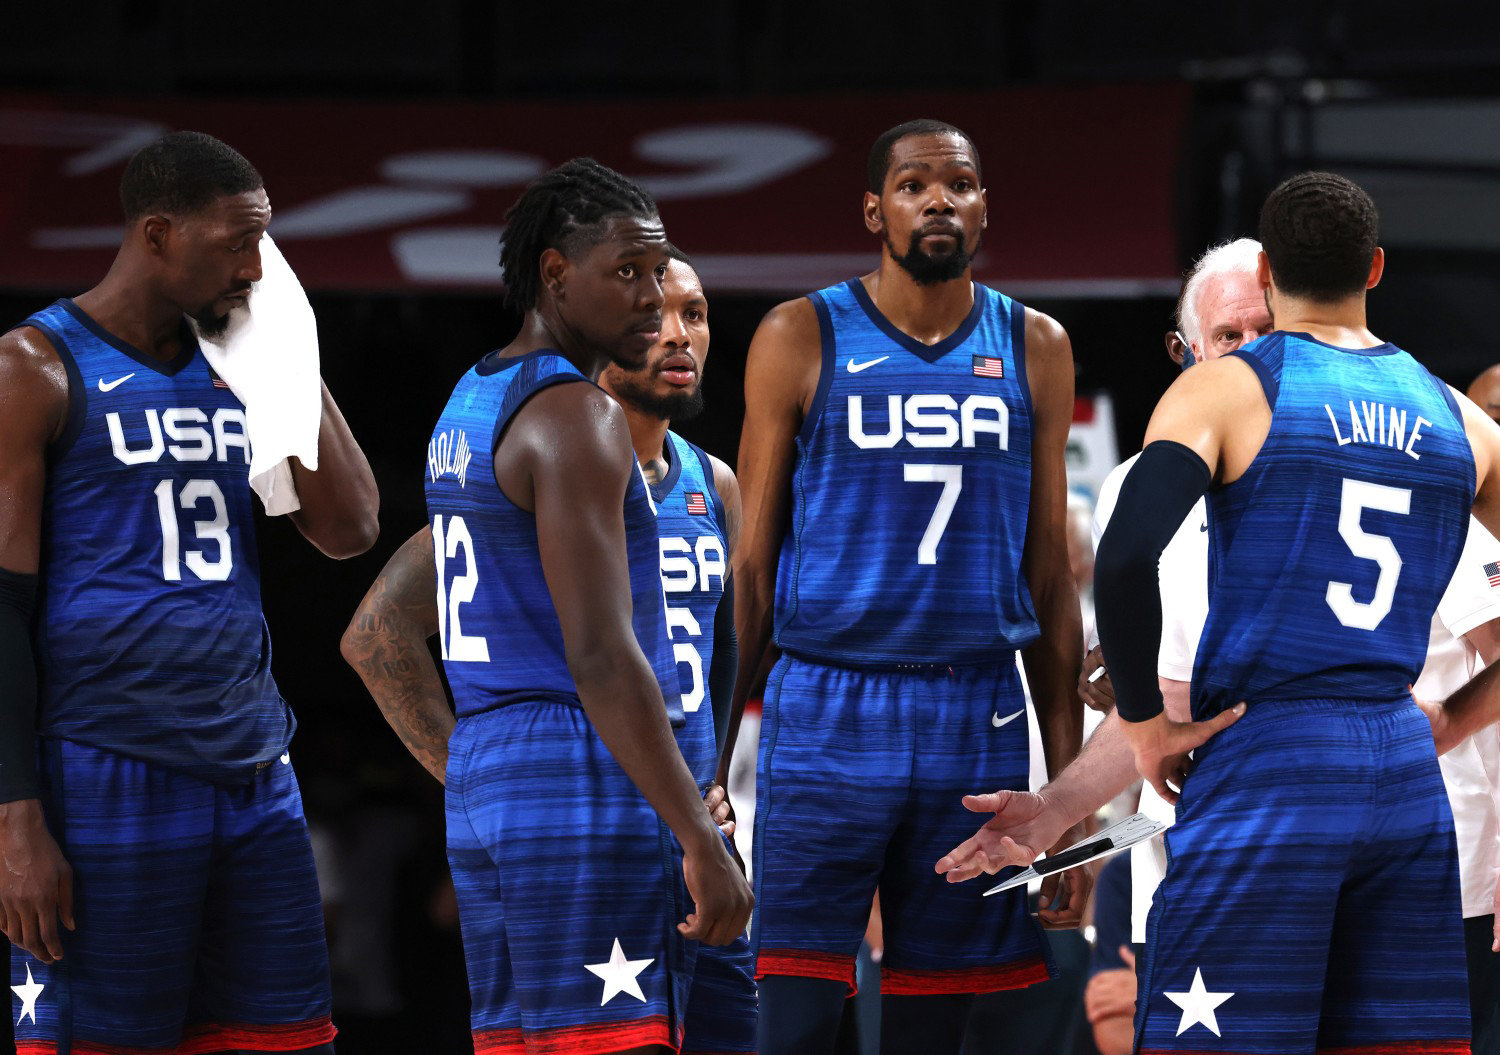 The U.S. men's basketball team during their loss to France at Saitama Super Arena in Tokyo, Japan, Sunday, July 25, 2021.